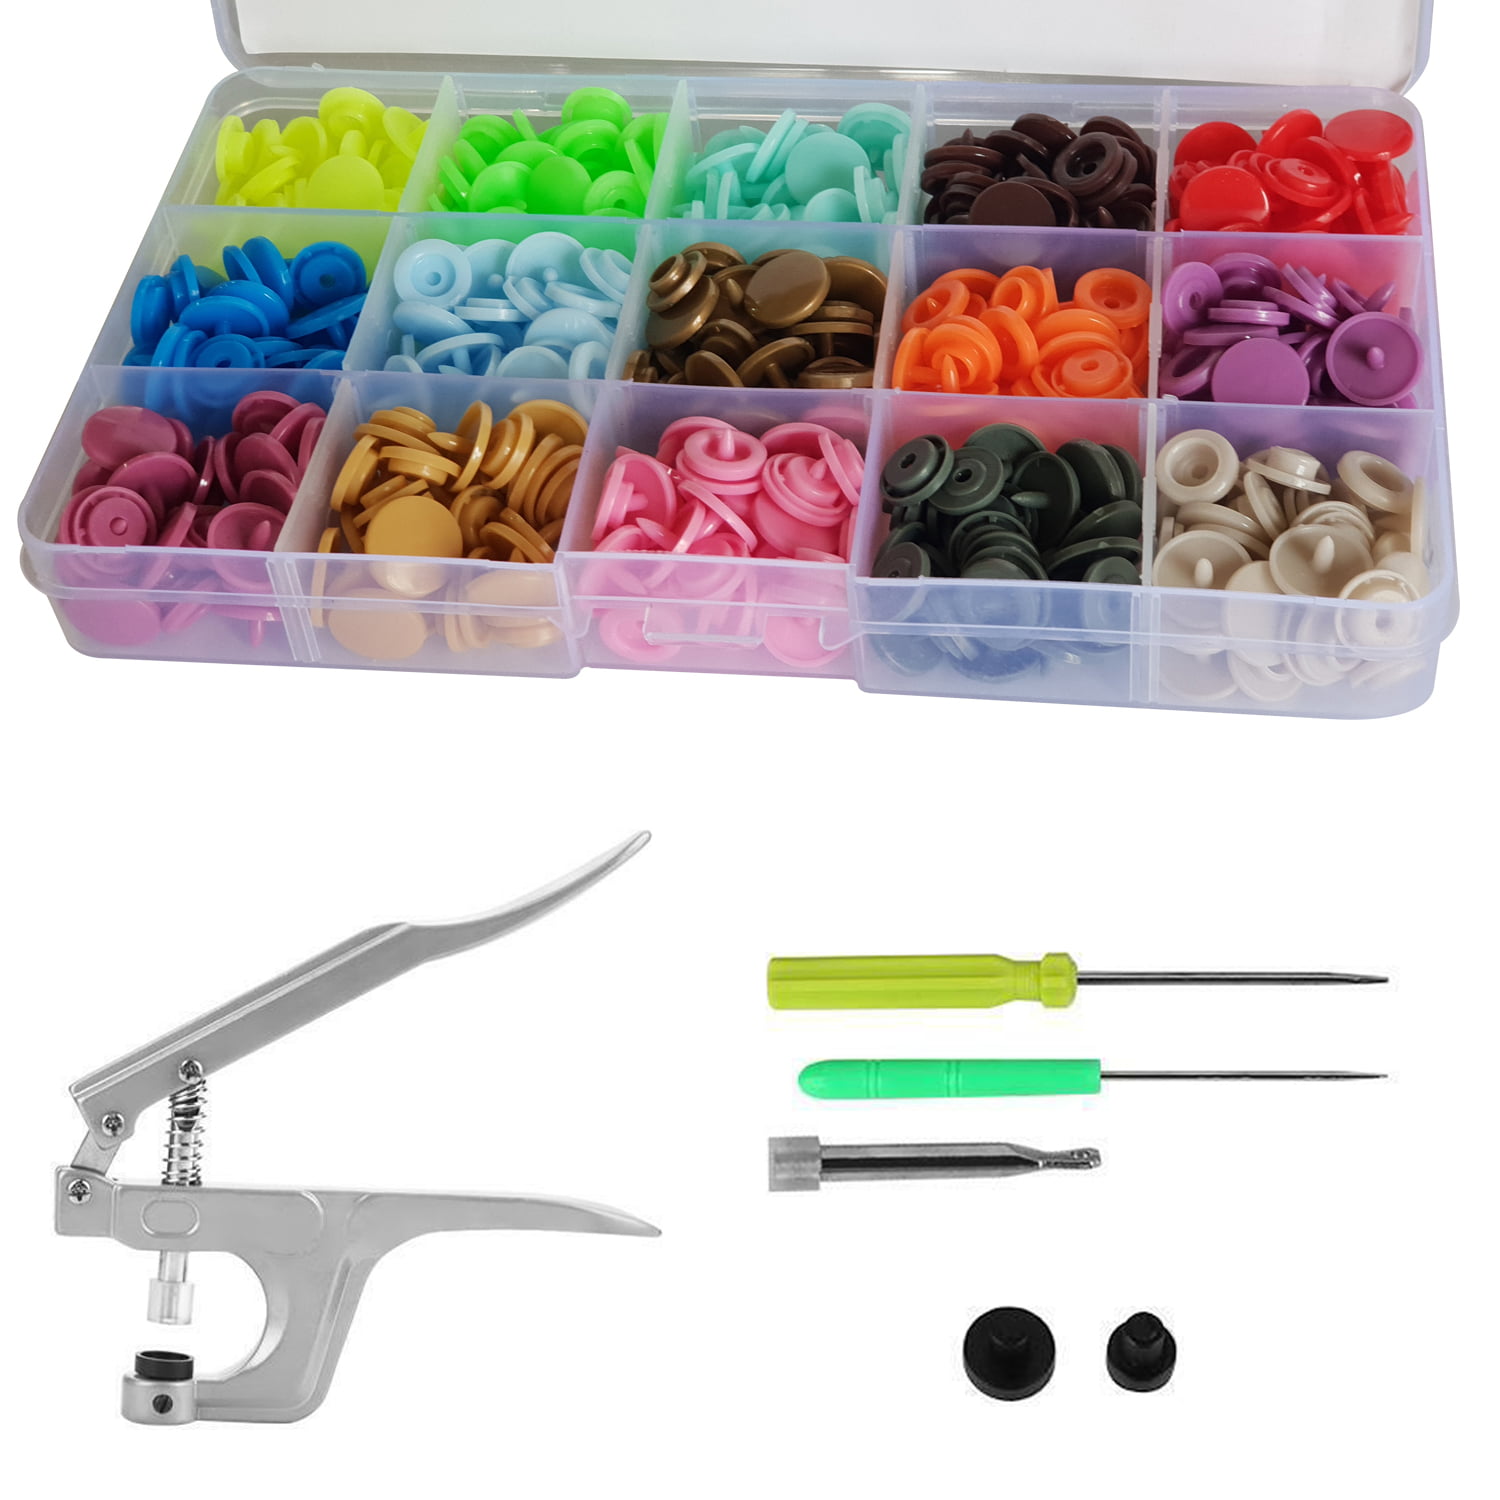 FSZON Snaps and Snap Pliers Set, 360 Sets of T5 Plastic Snap Buttons in 24  Colors